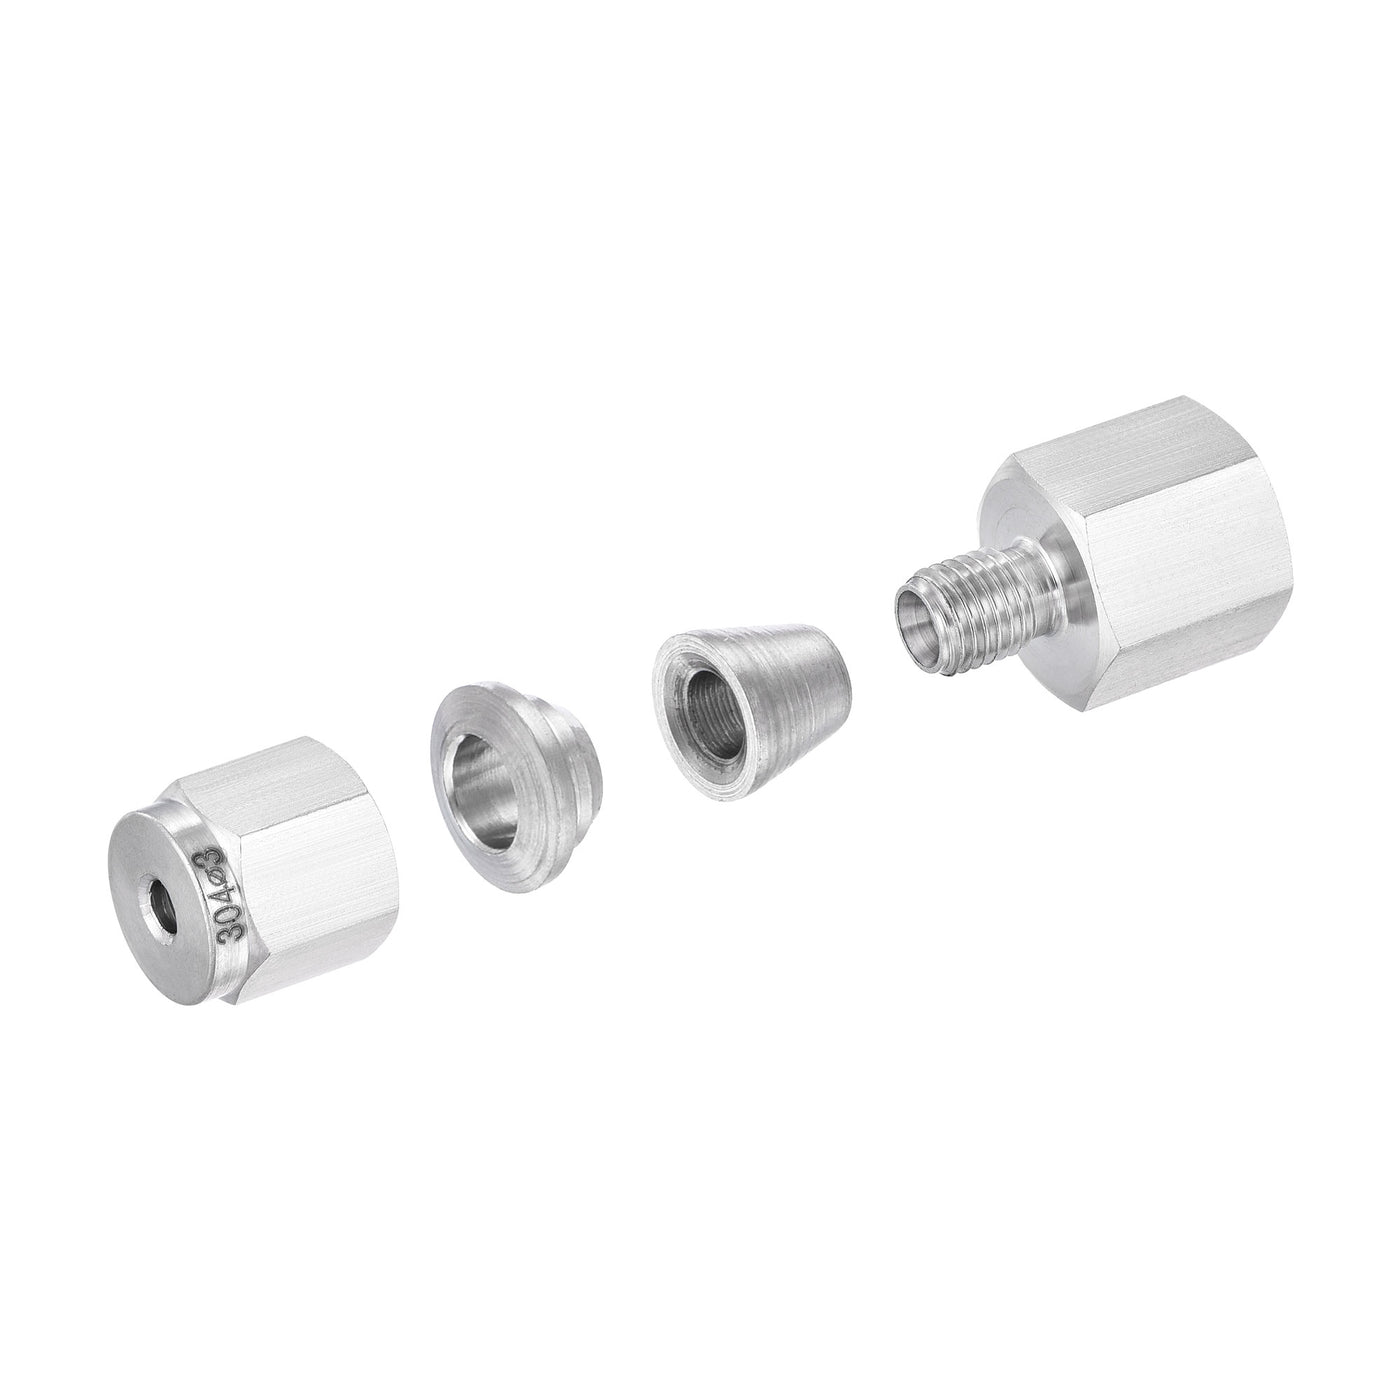 Uxcell Uxcell Compression Tube Fitting 1/4NPT Female Thread x 6mm Tube OD Straight Coupling Adapter 304 Stainless Steel